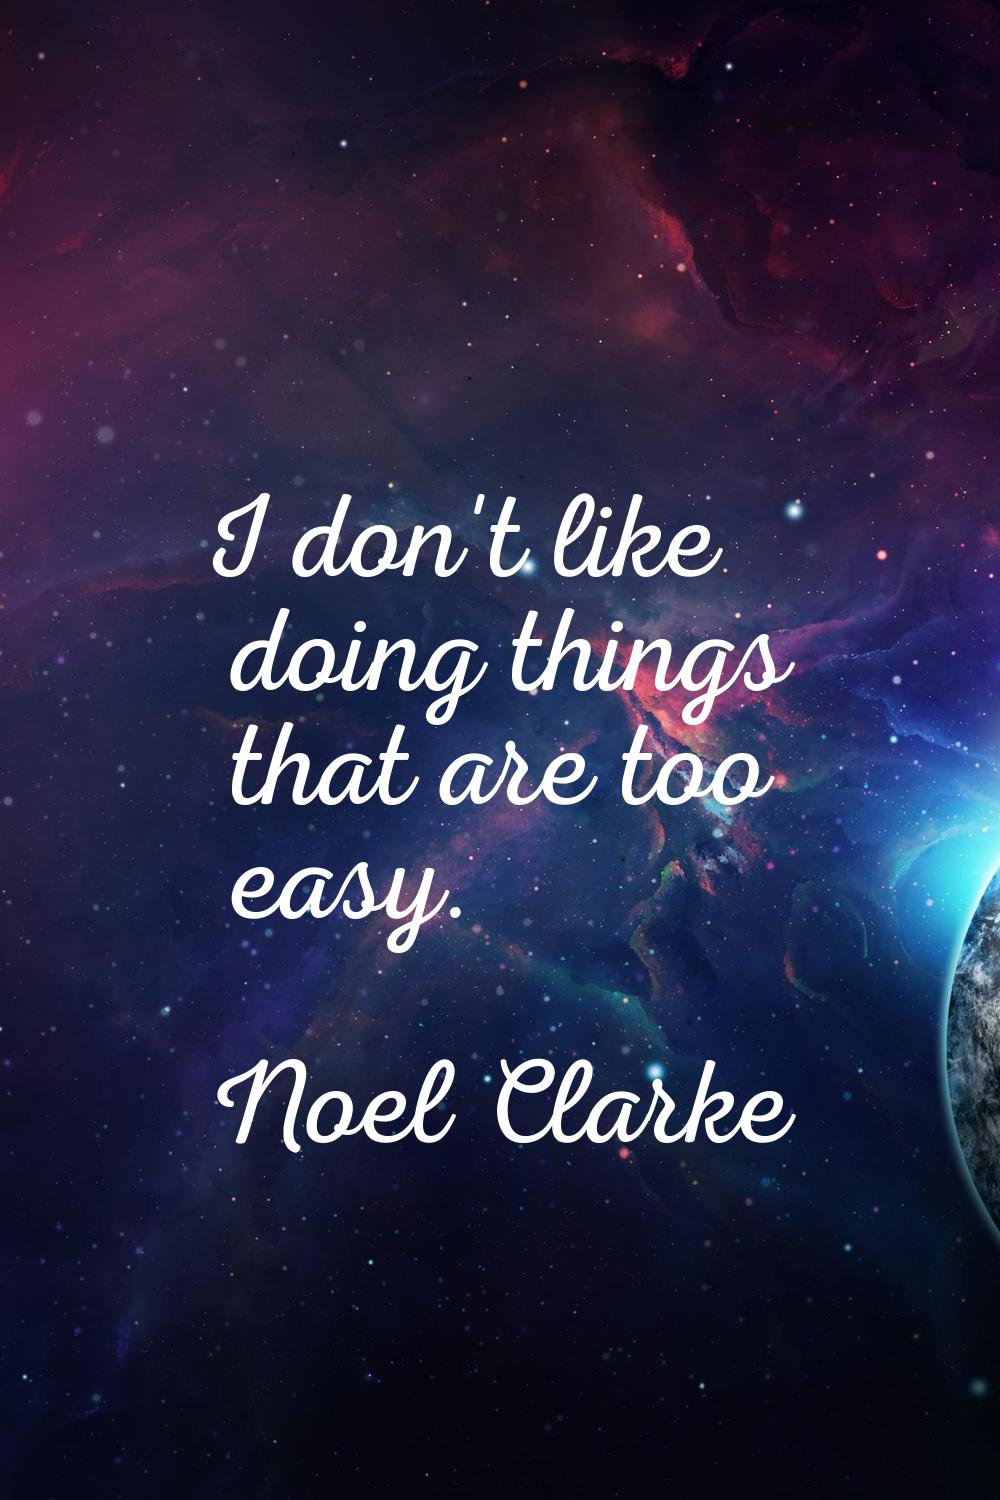 I don't like doing things that are too easy.